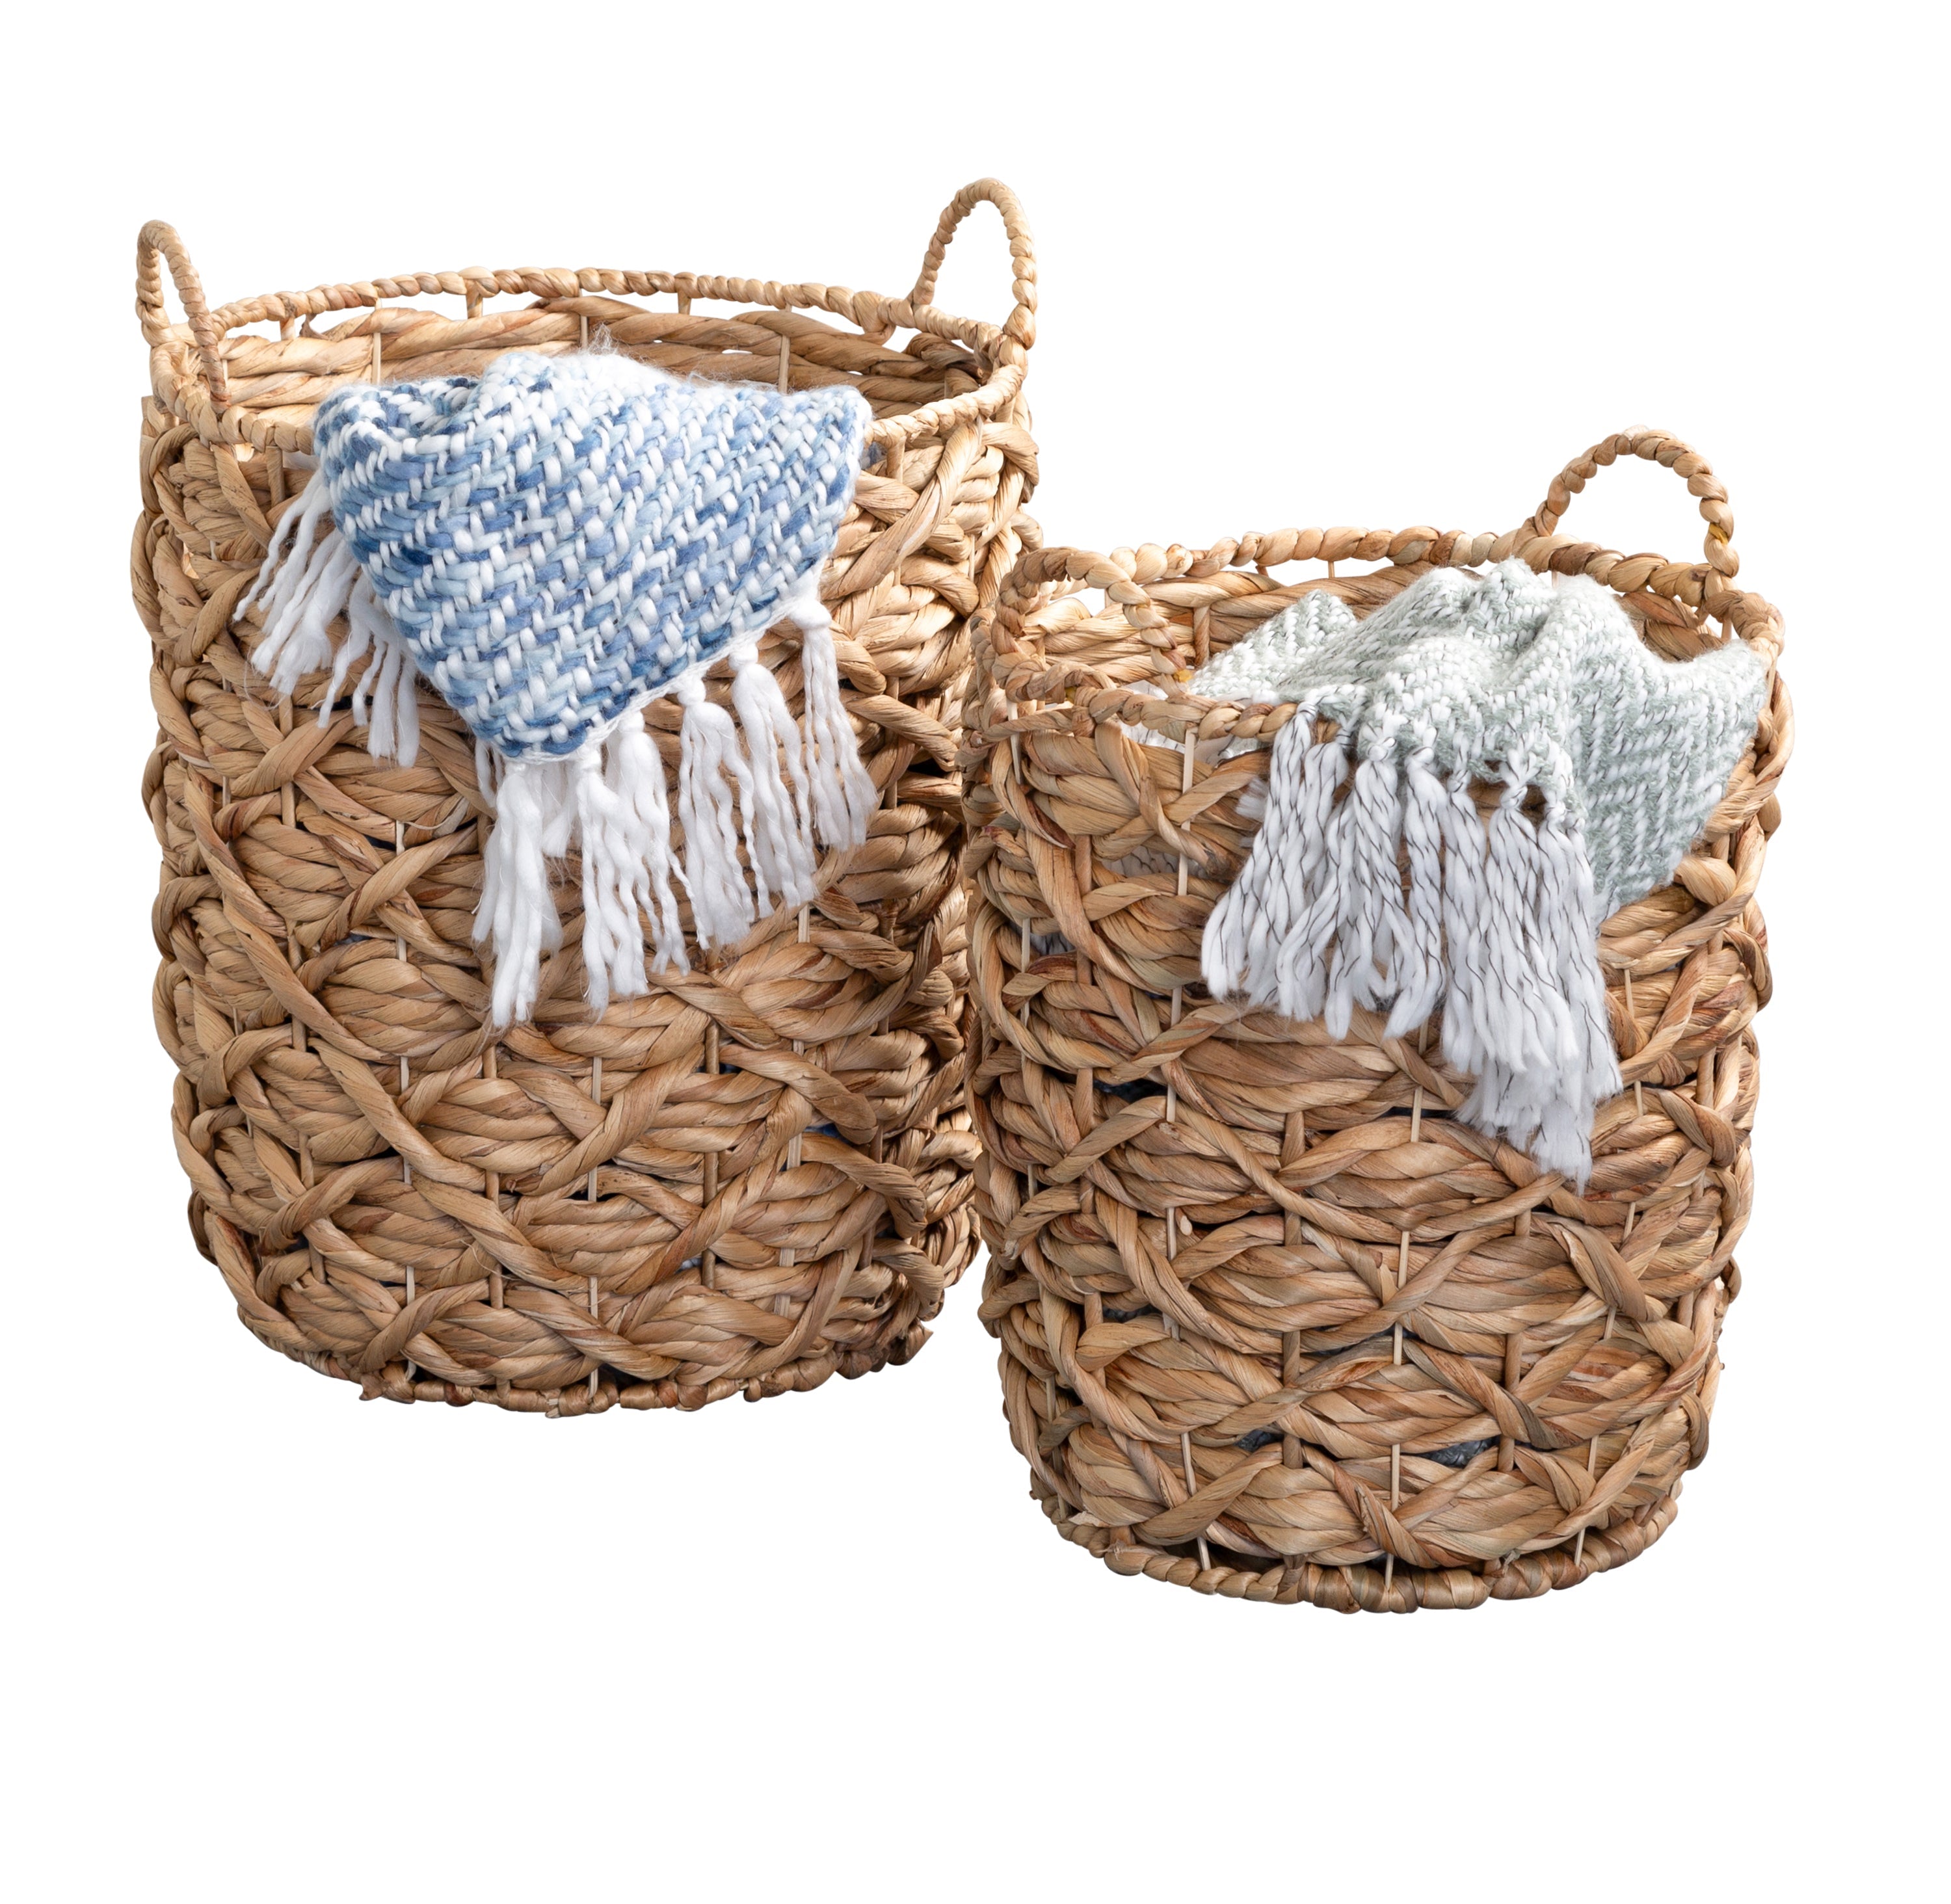 Small Wicker Baskets for Organizing Bathroom, Hyacinth Baskets for Storage,  Wicker Storage Basket with Wooden Handle, Decorative Wicker Small Basket